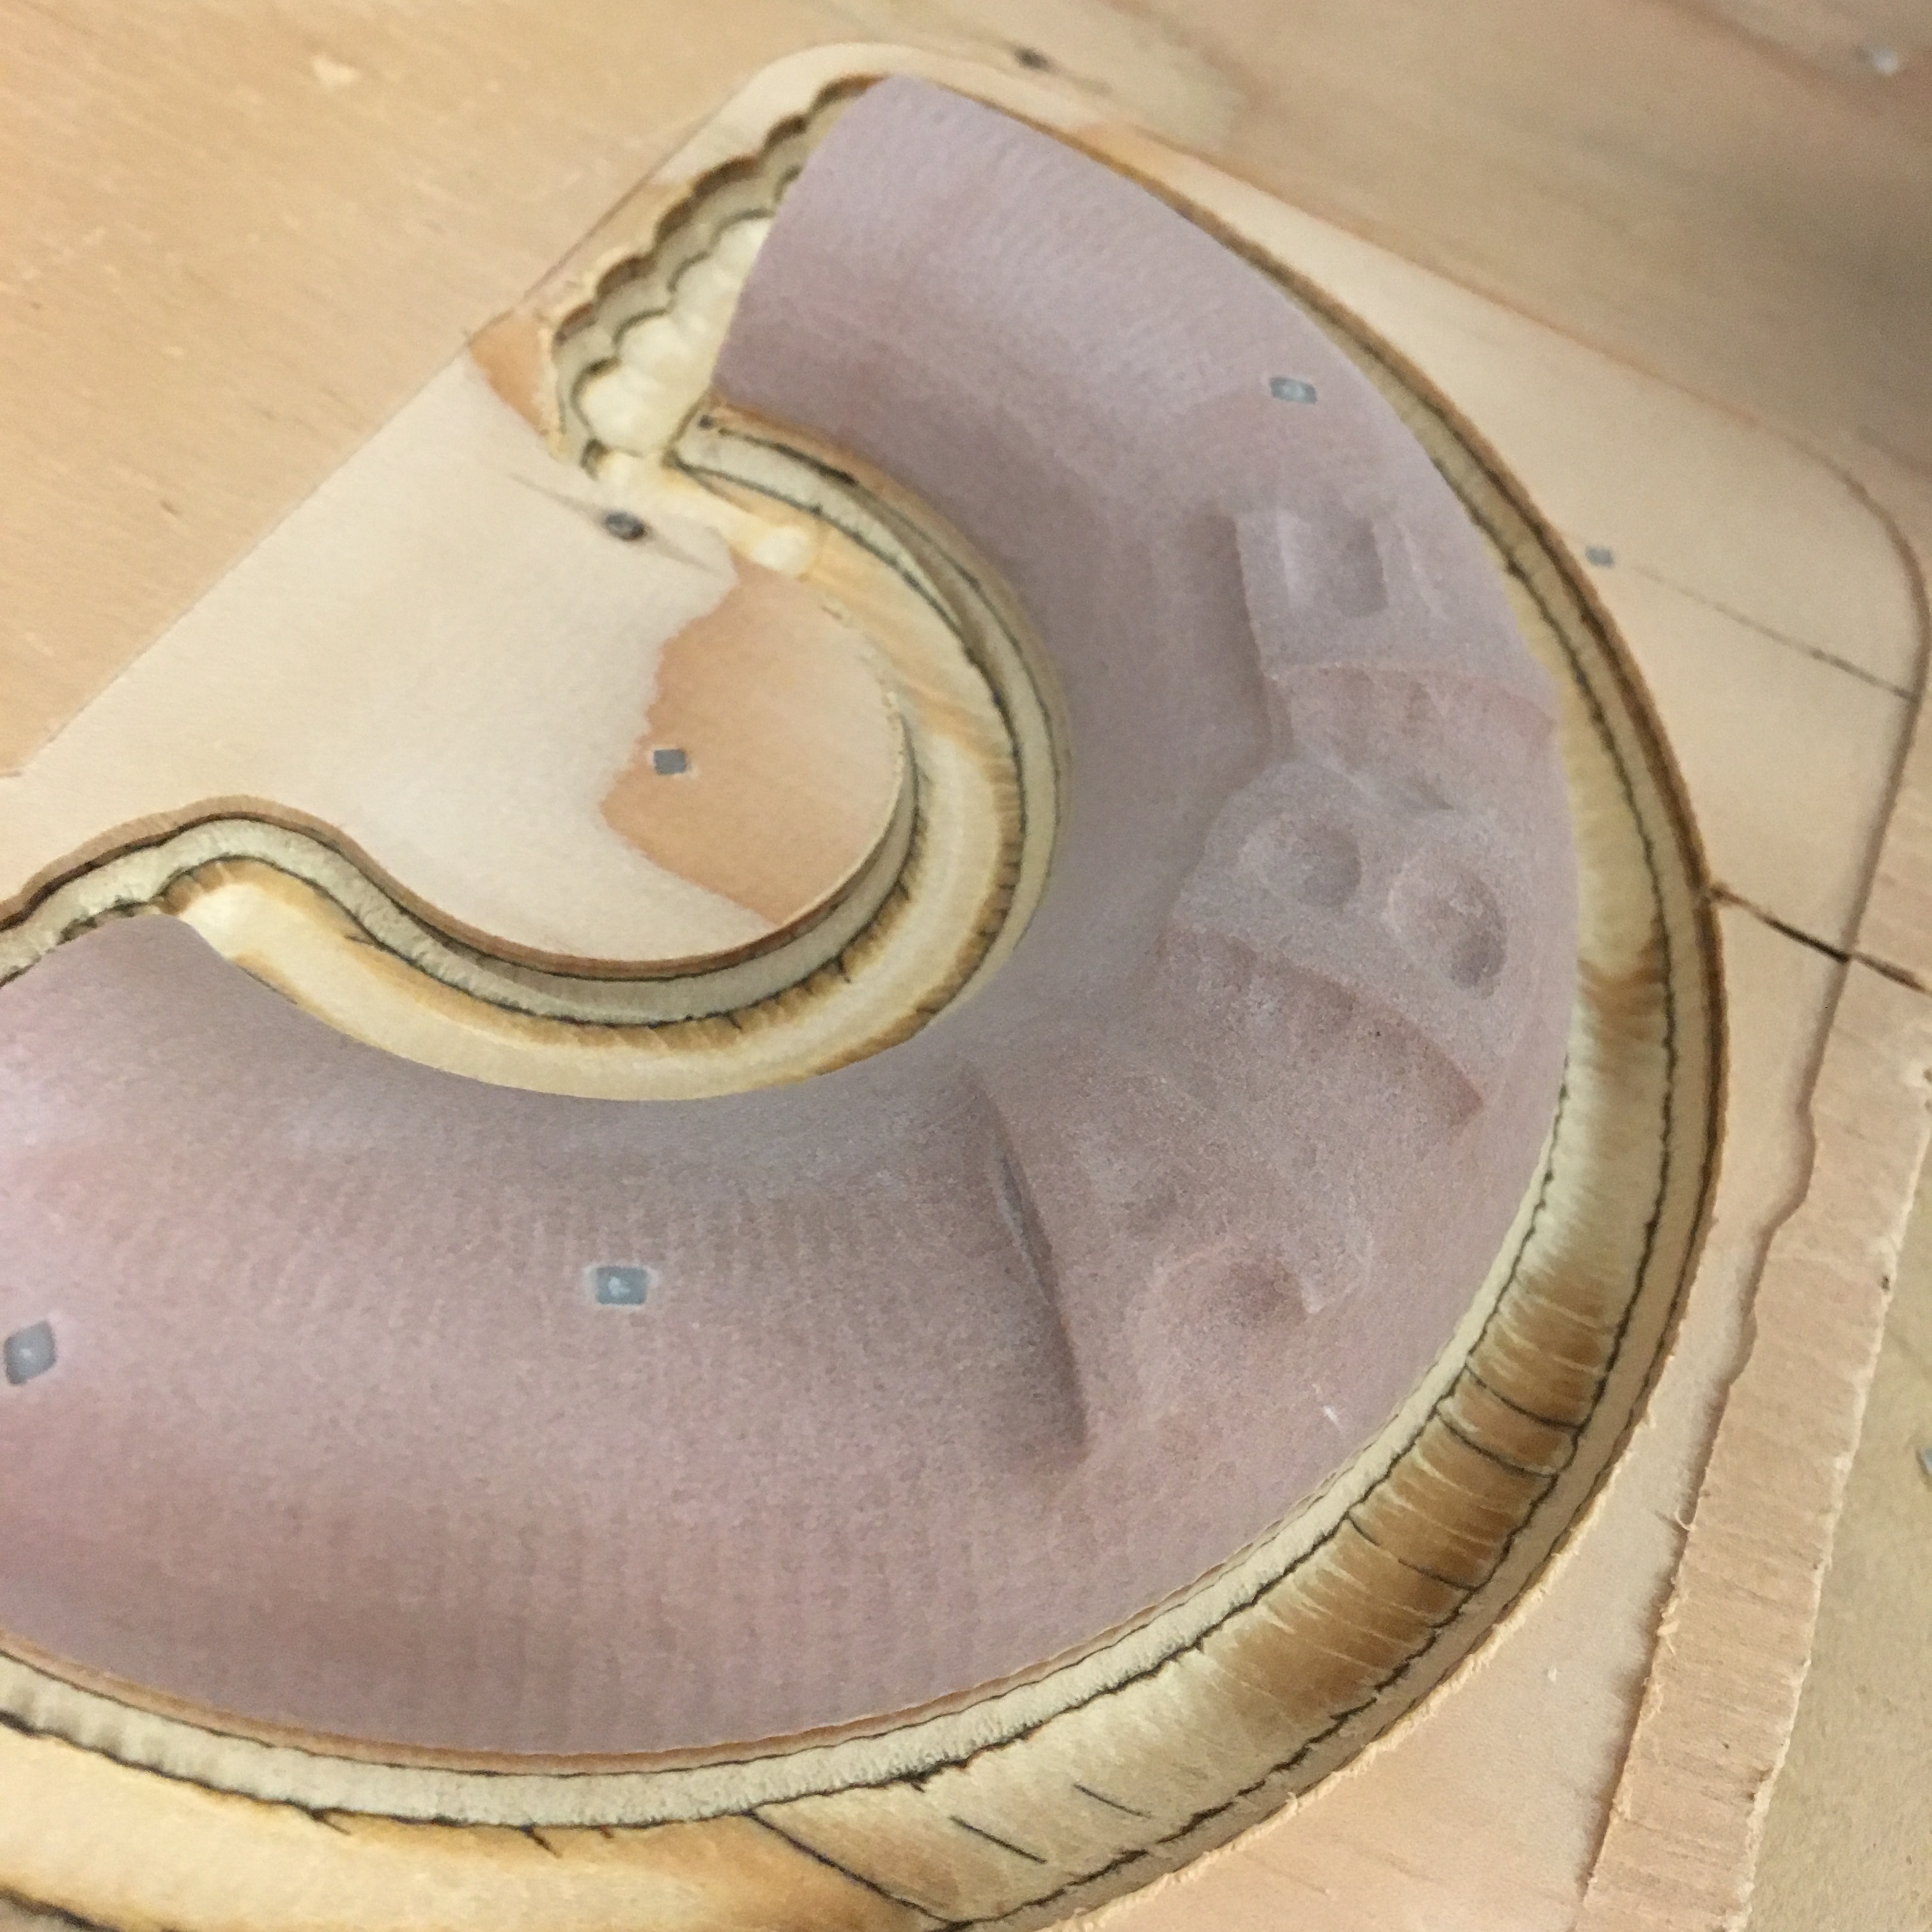 Testing milling extruded letters on a torus